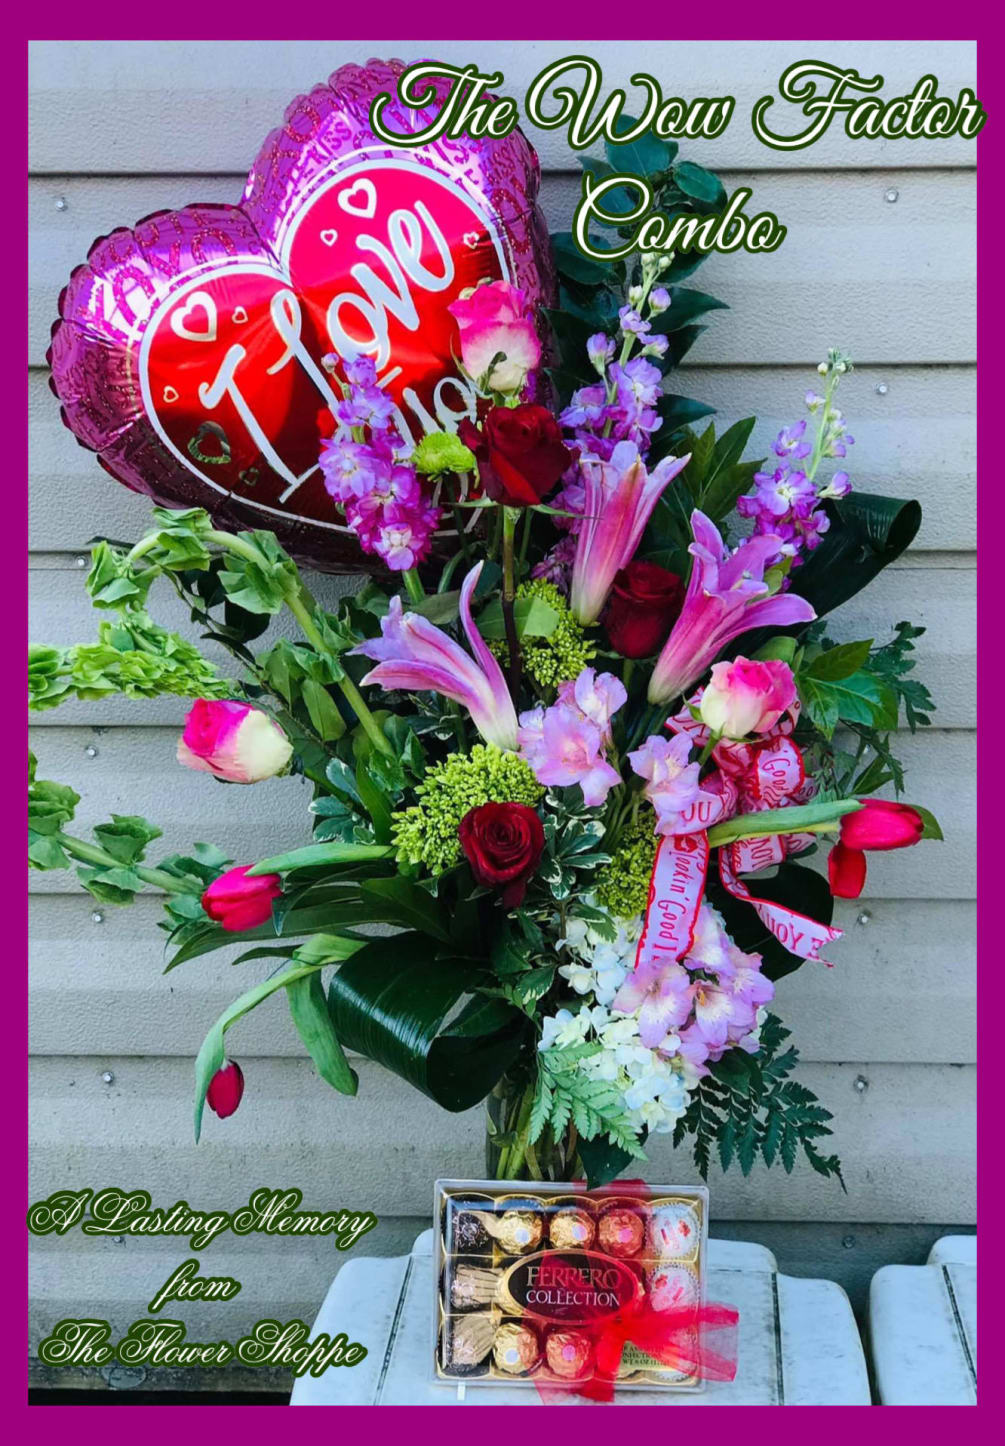 This includes large specialty bouquet of our choice, balloon and chocolates. This